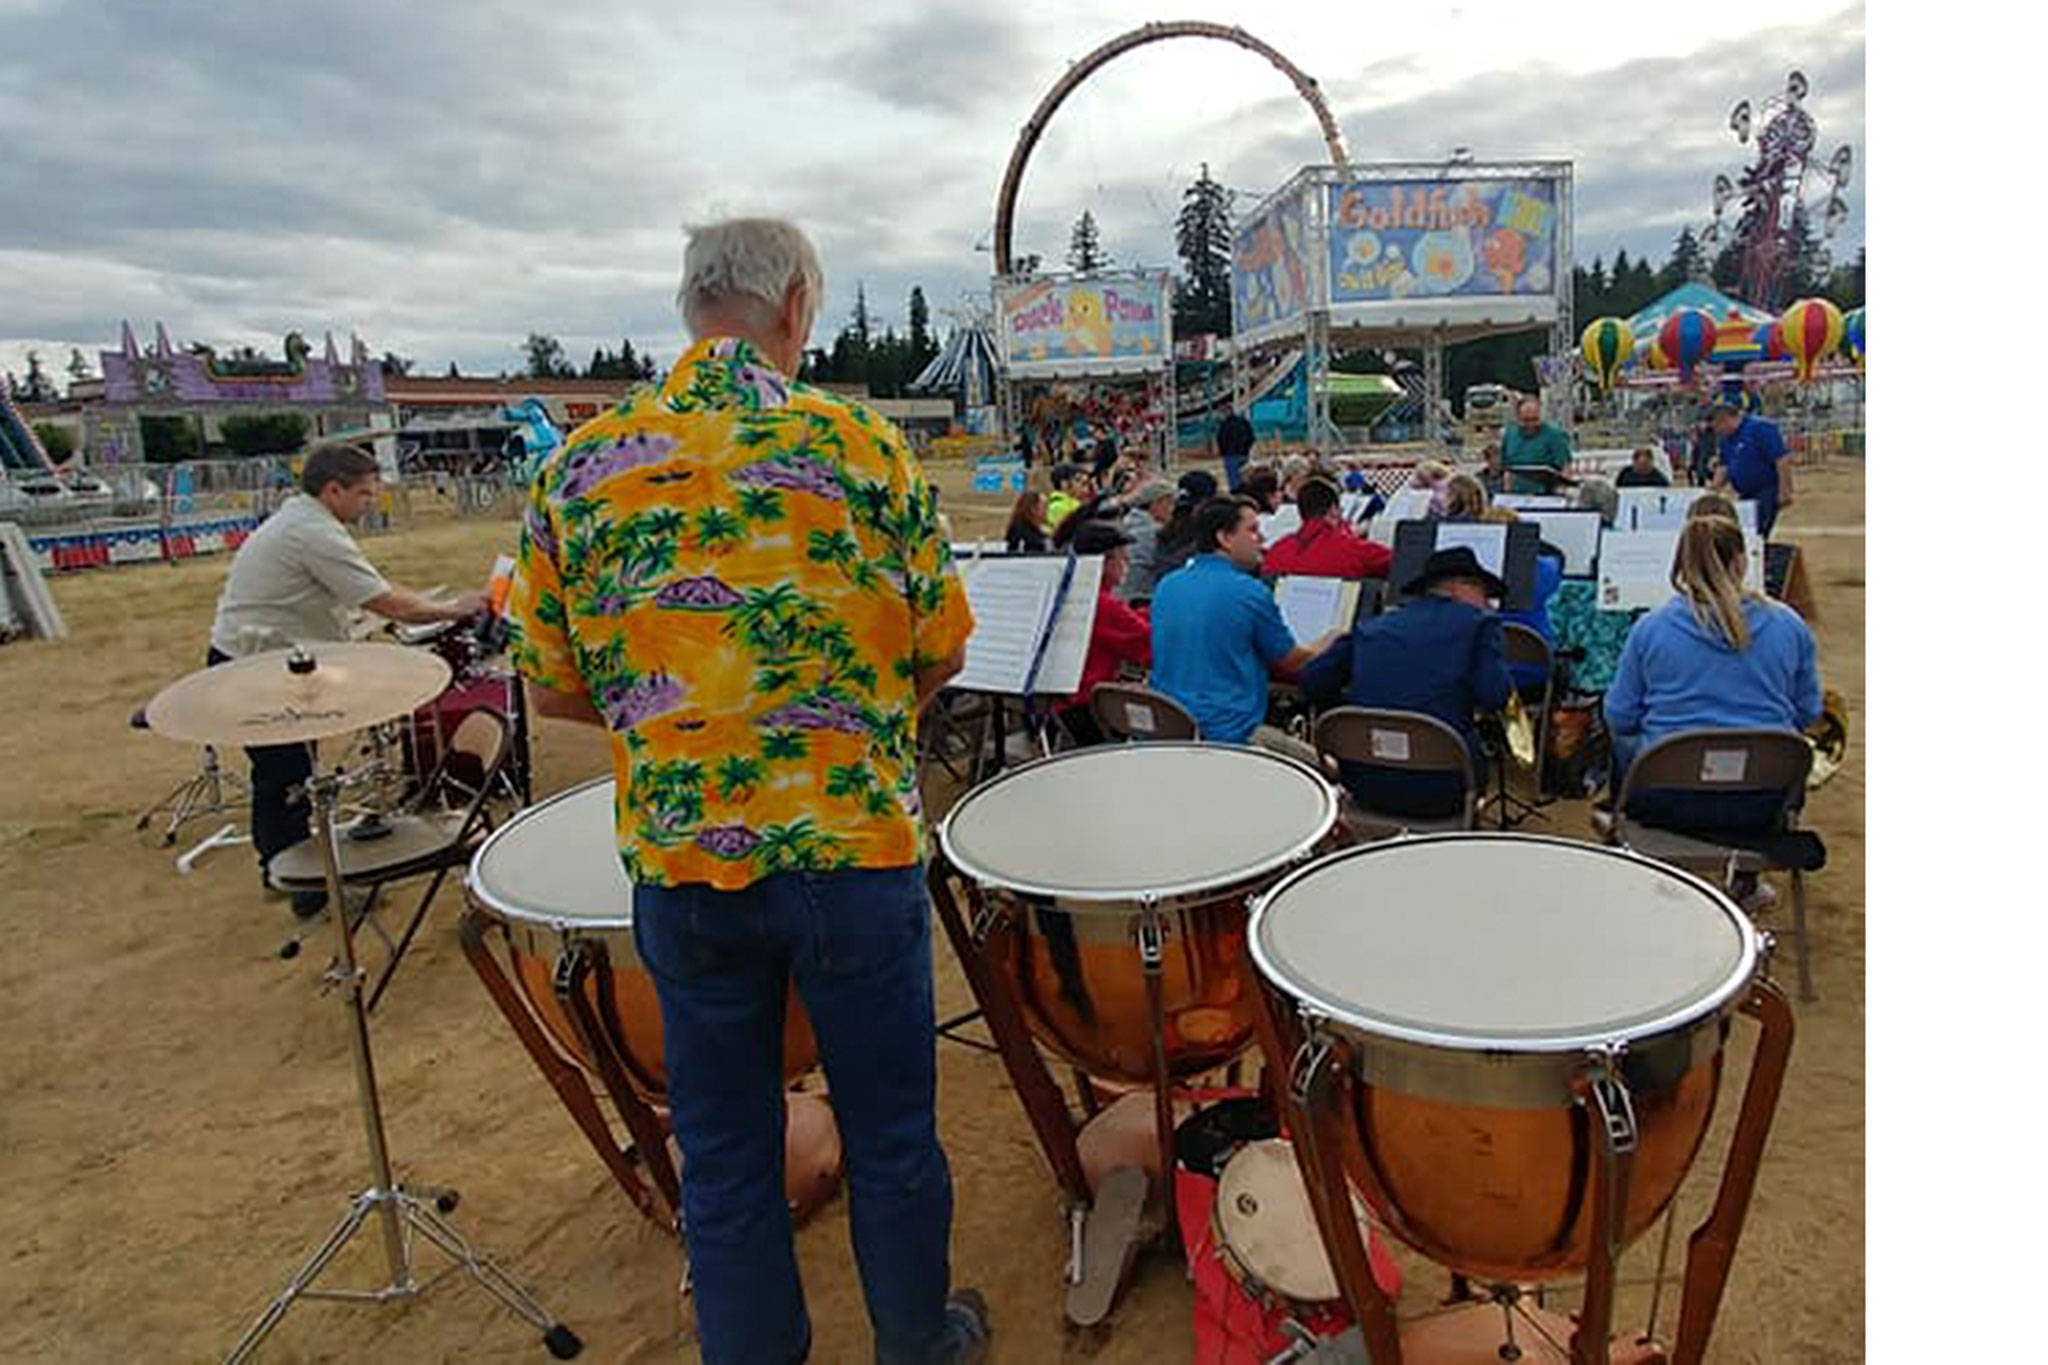 The band plays on - even at a carnival in Marysville (slide show)